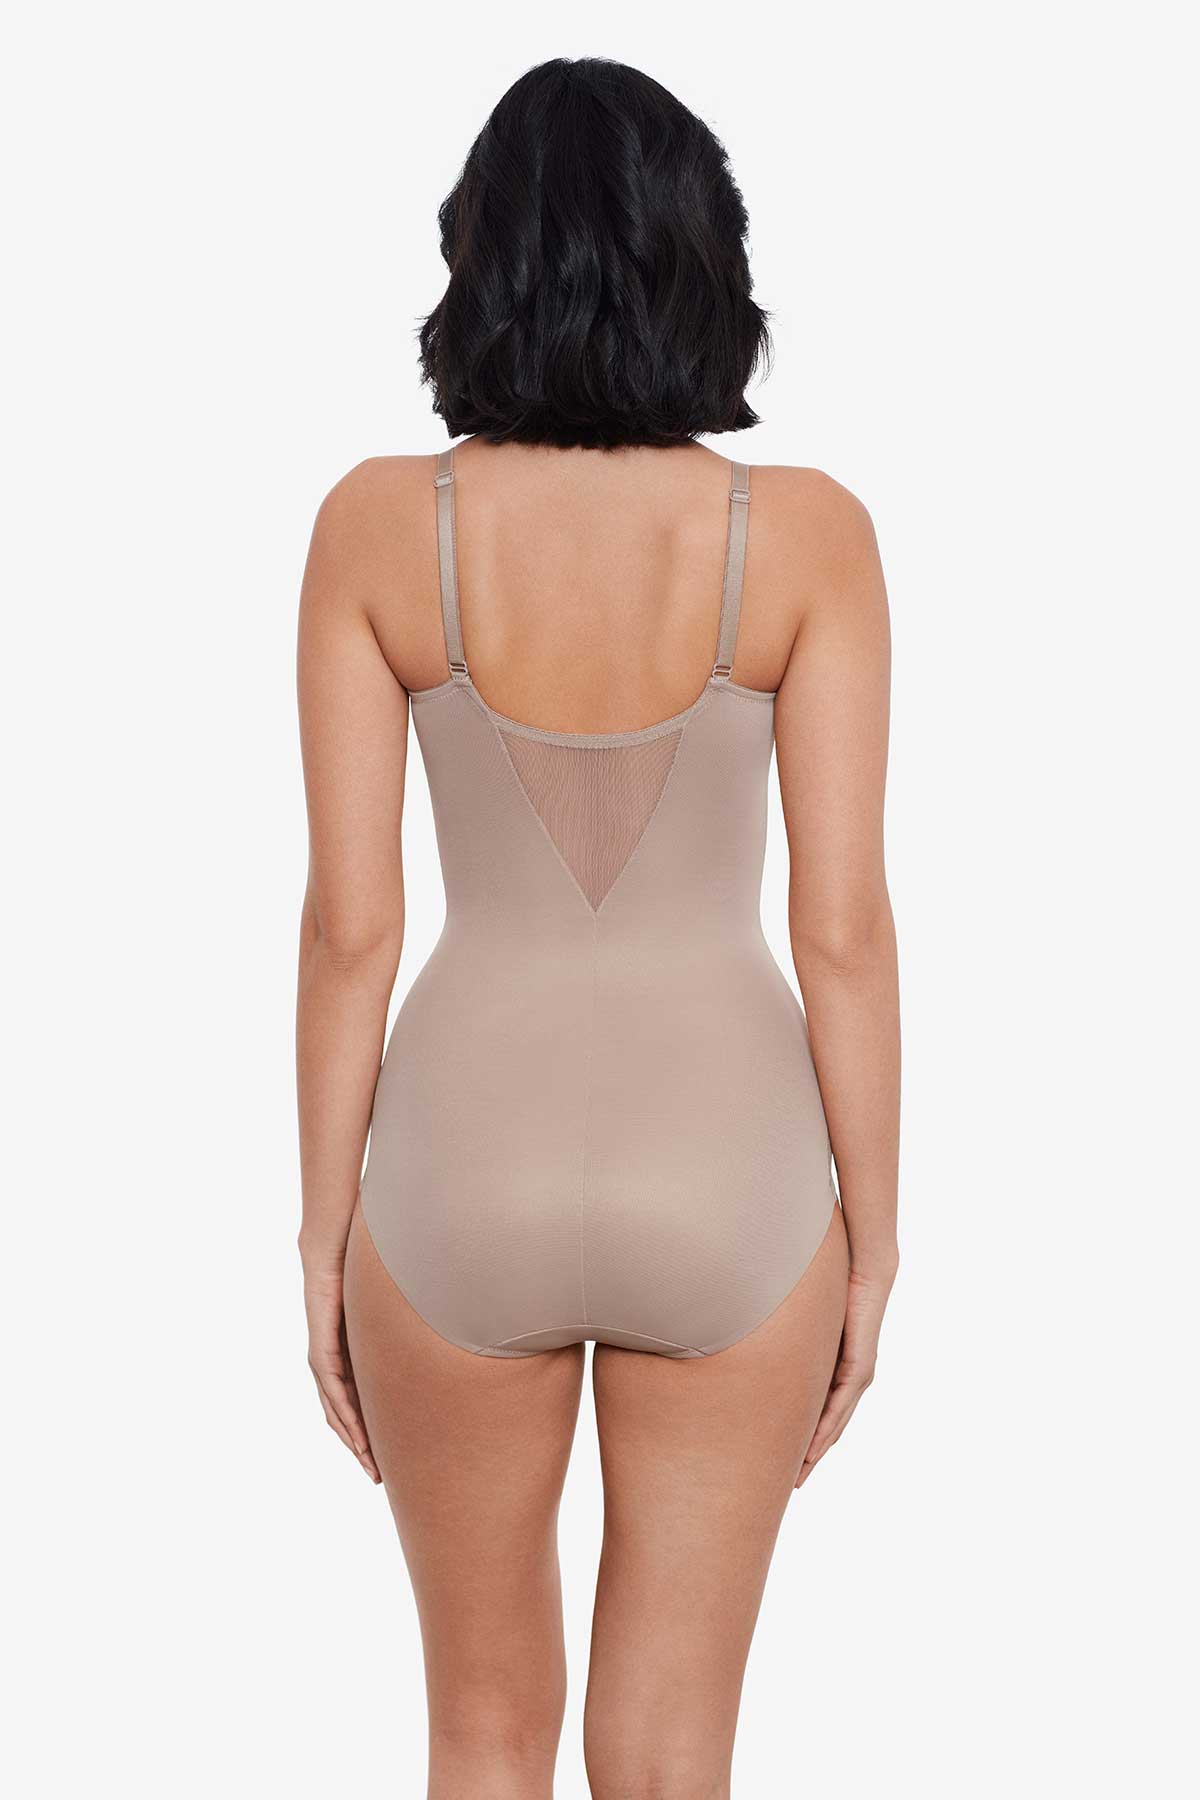 Style 2770 - Miraclesuit® Sexy Sheer Shaping Thong Bodybriefer